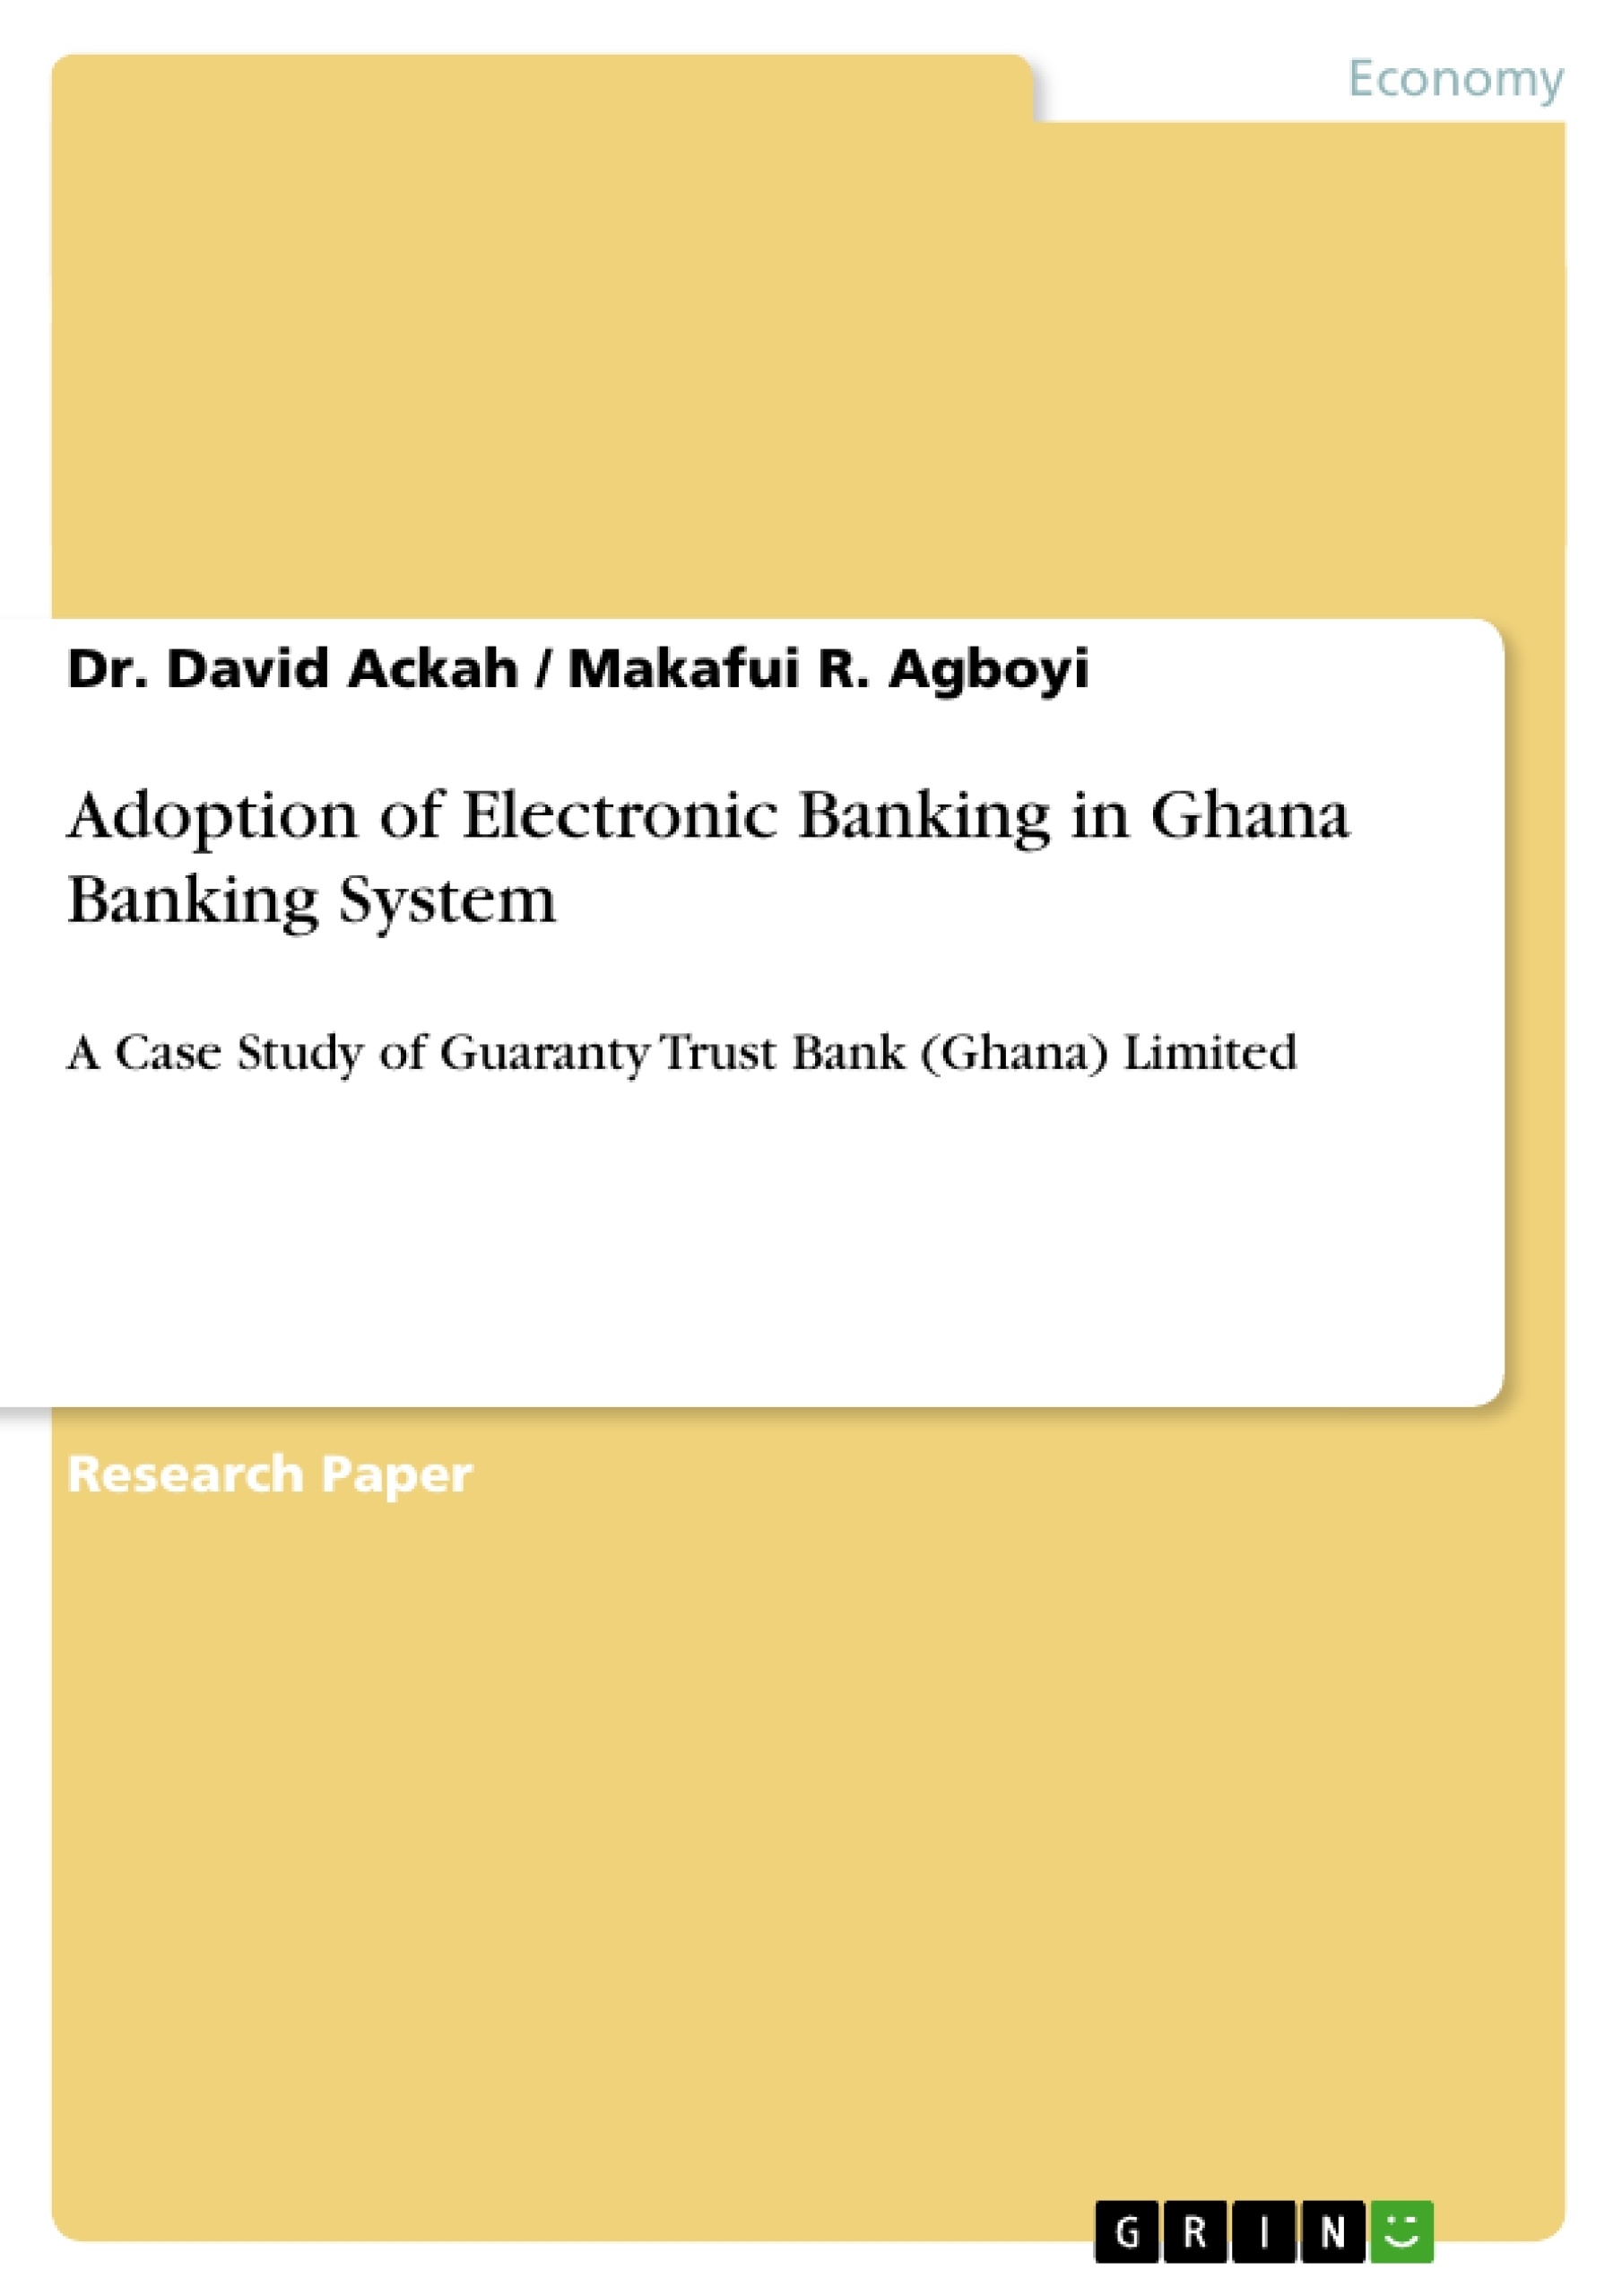 Título: Adoption of Electronic Banking in Ghana Banking System